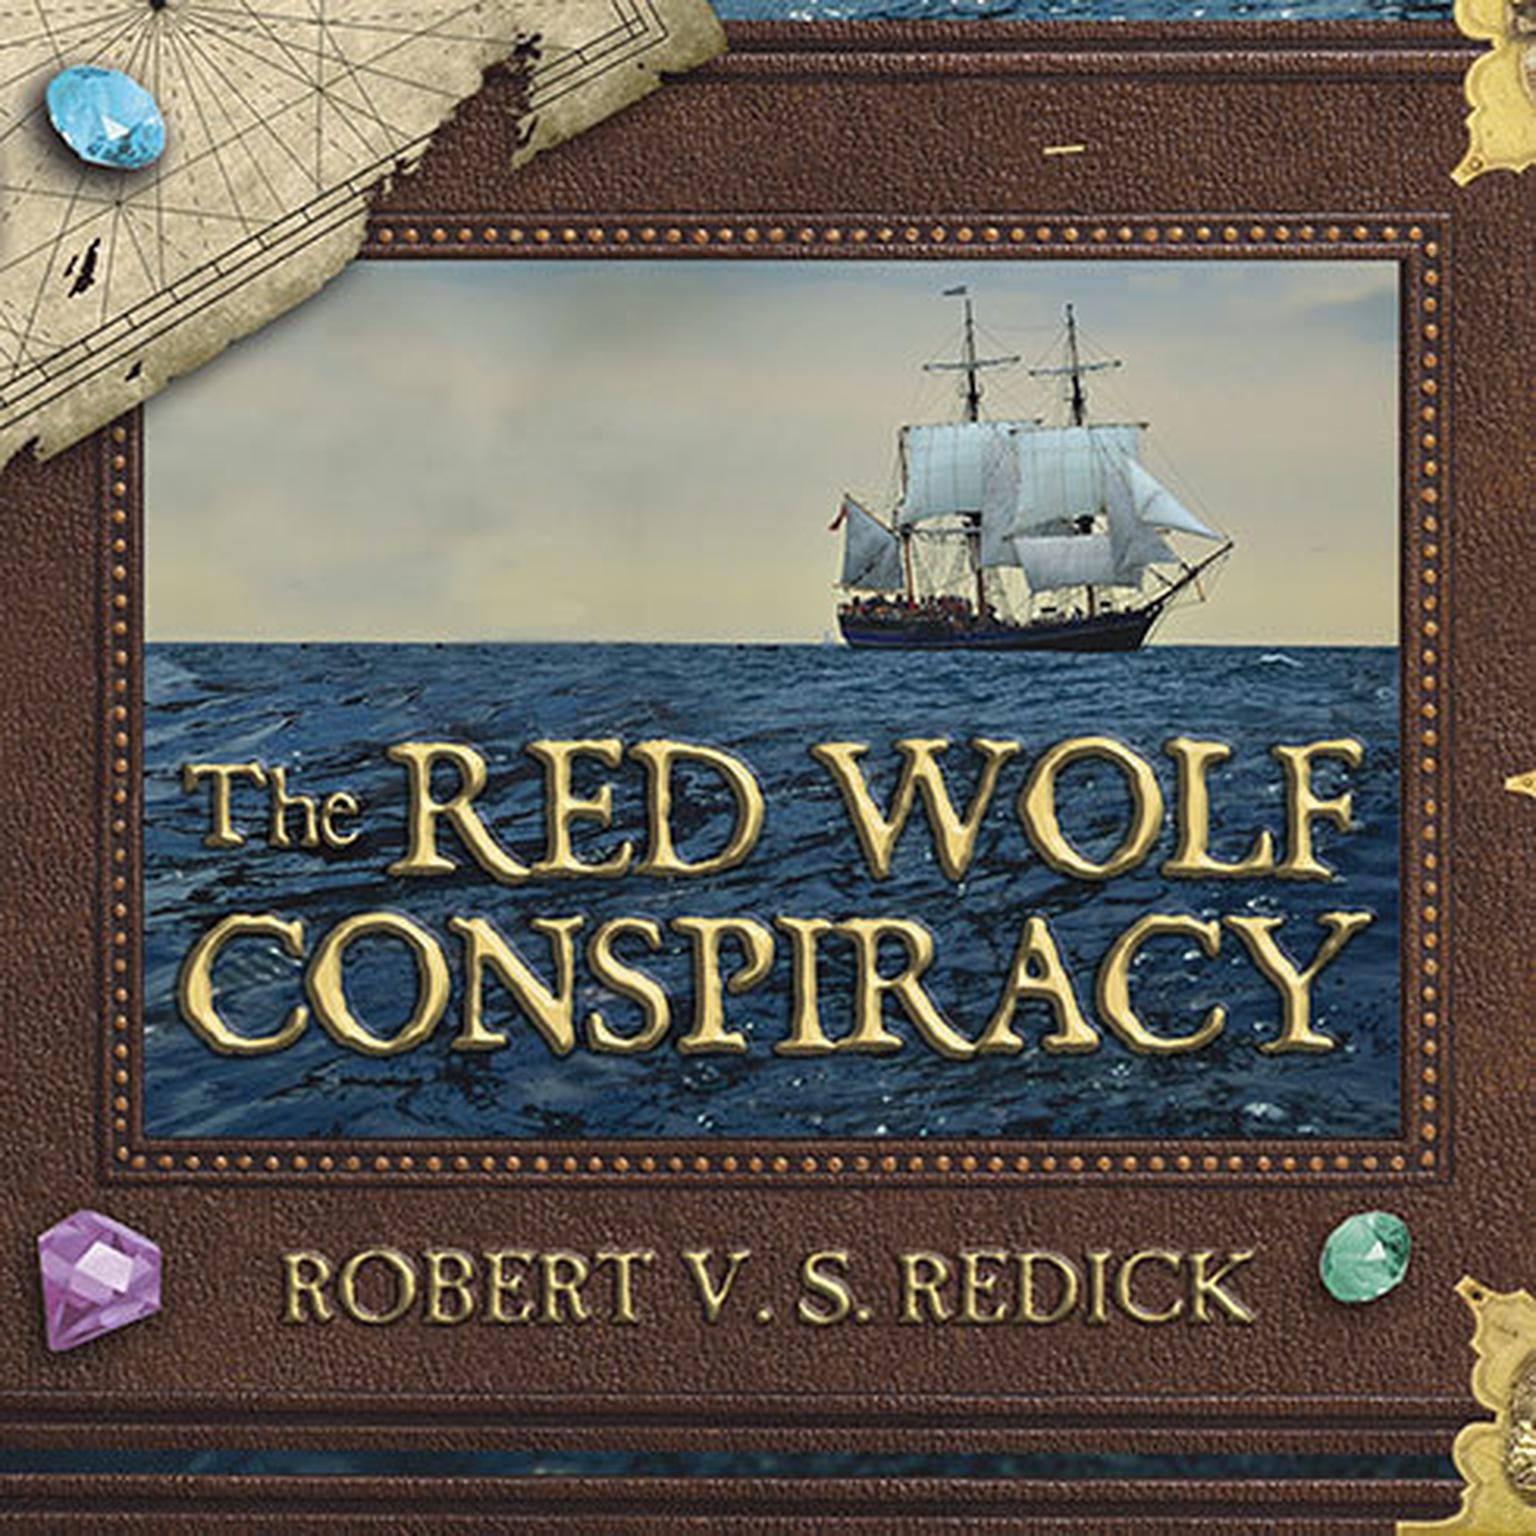 The Red Wolf Conspiracy Audiobook, by Robert V. S. Redick